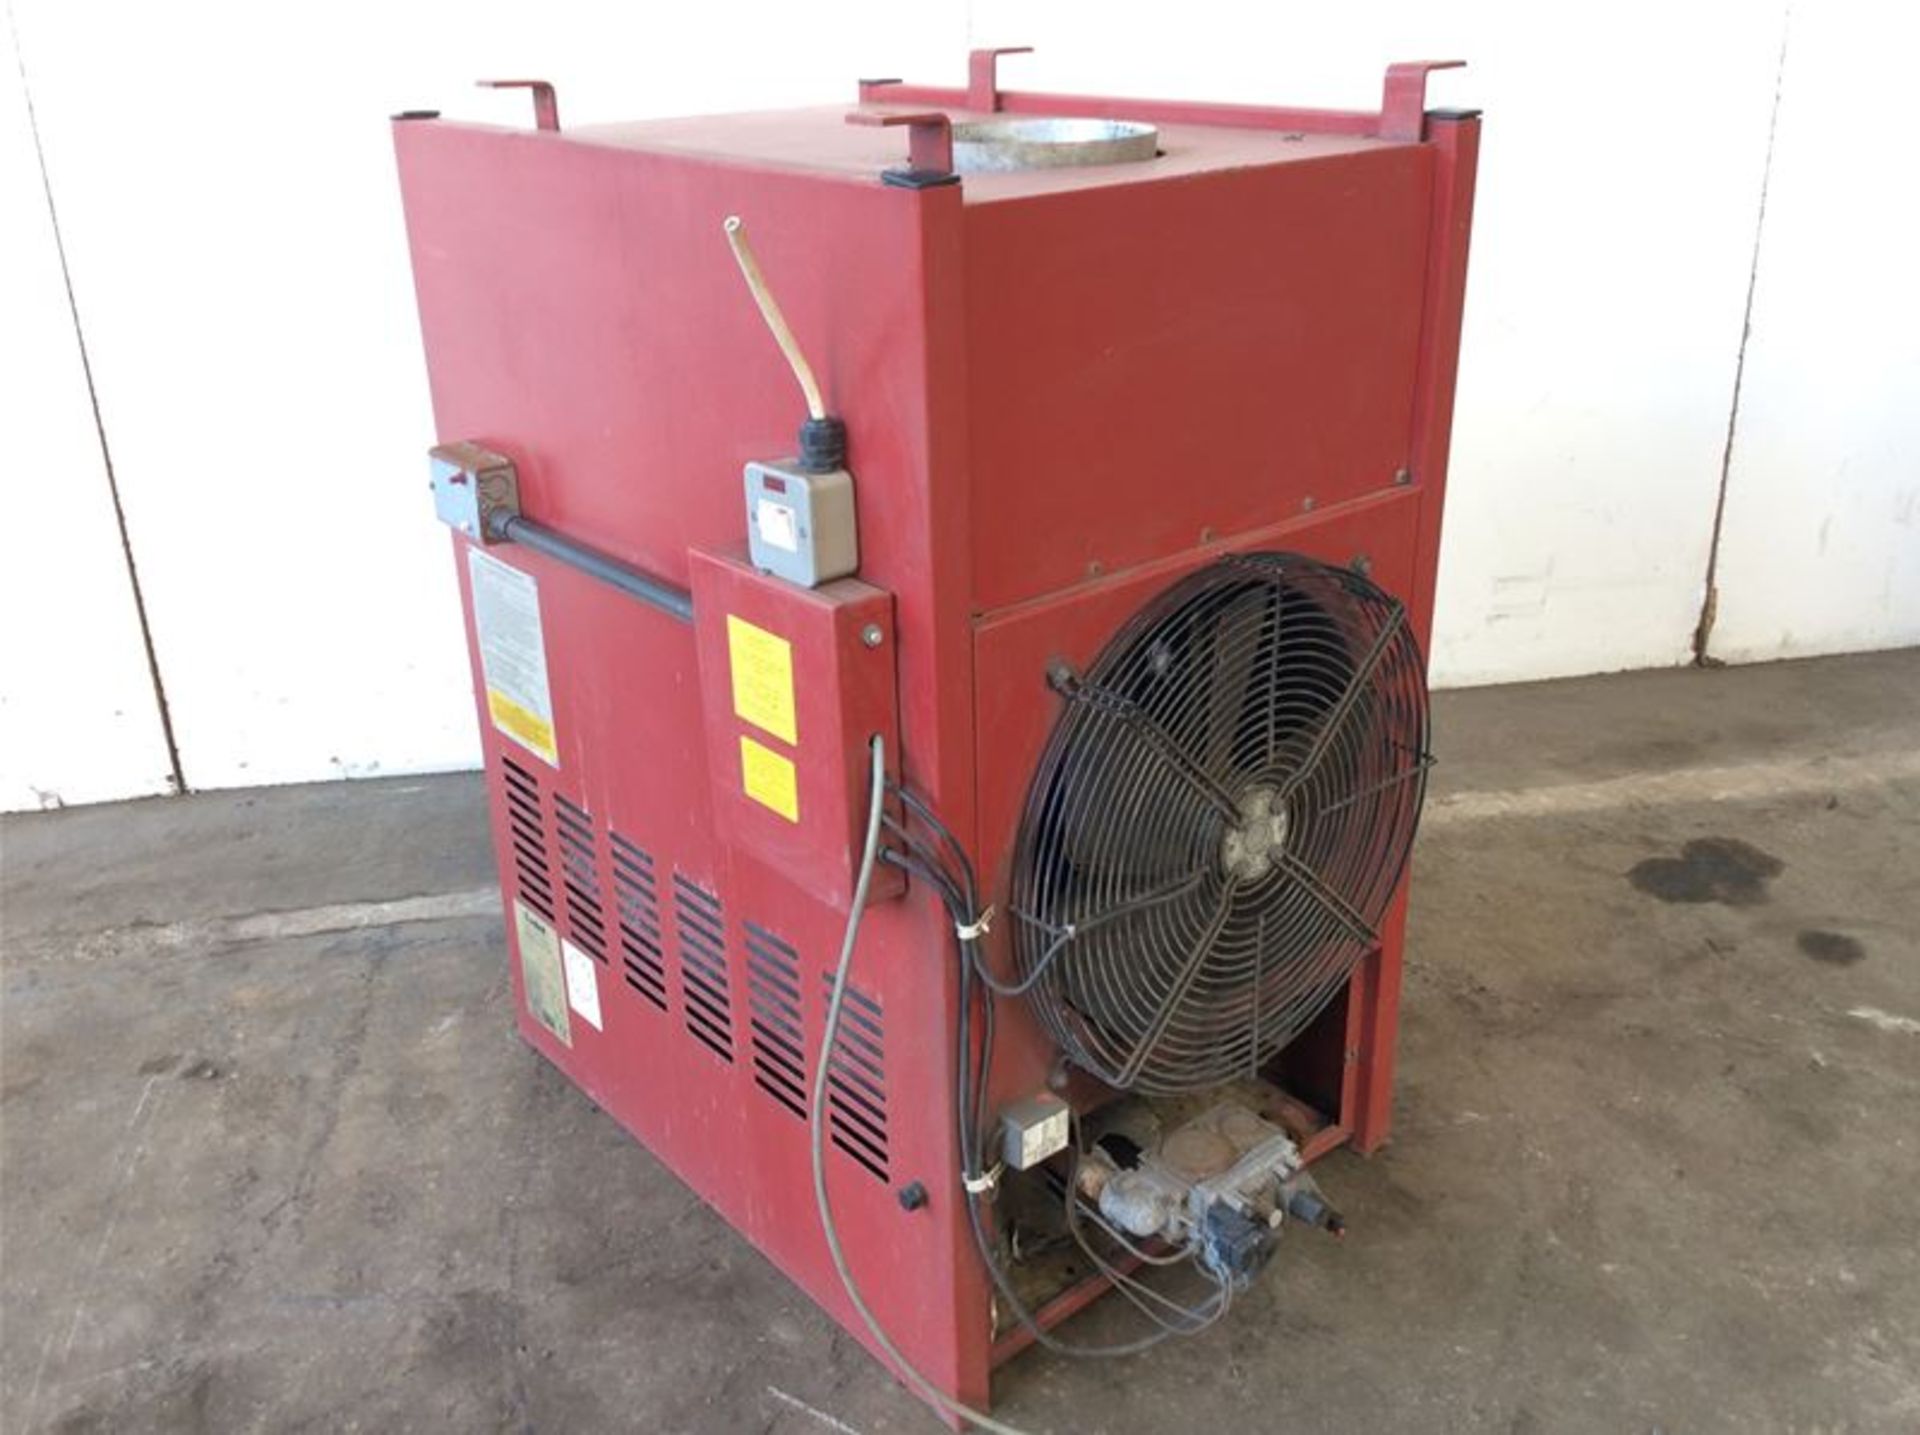 COMBAT CUHA 120 NATURAL GAS FIRED AIR SPACE HEATER - 33KW - Image 2 of 4